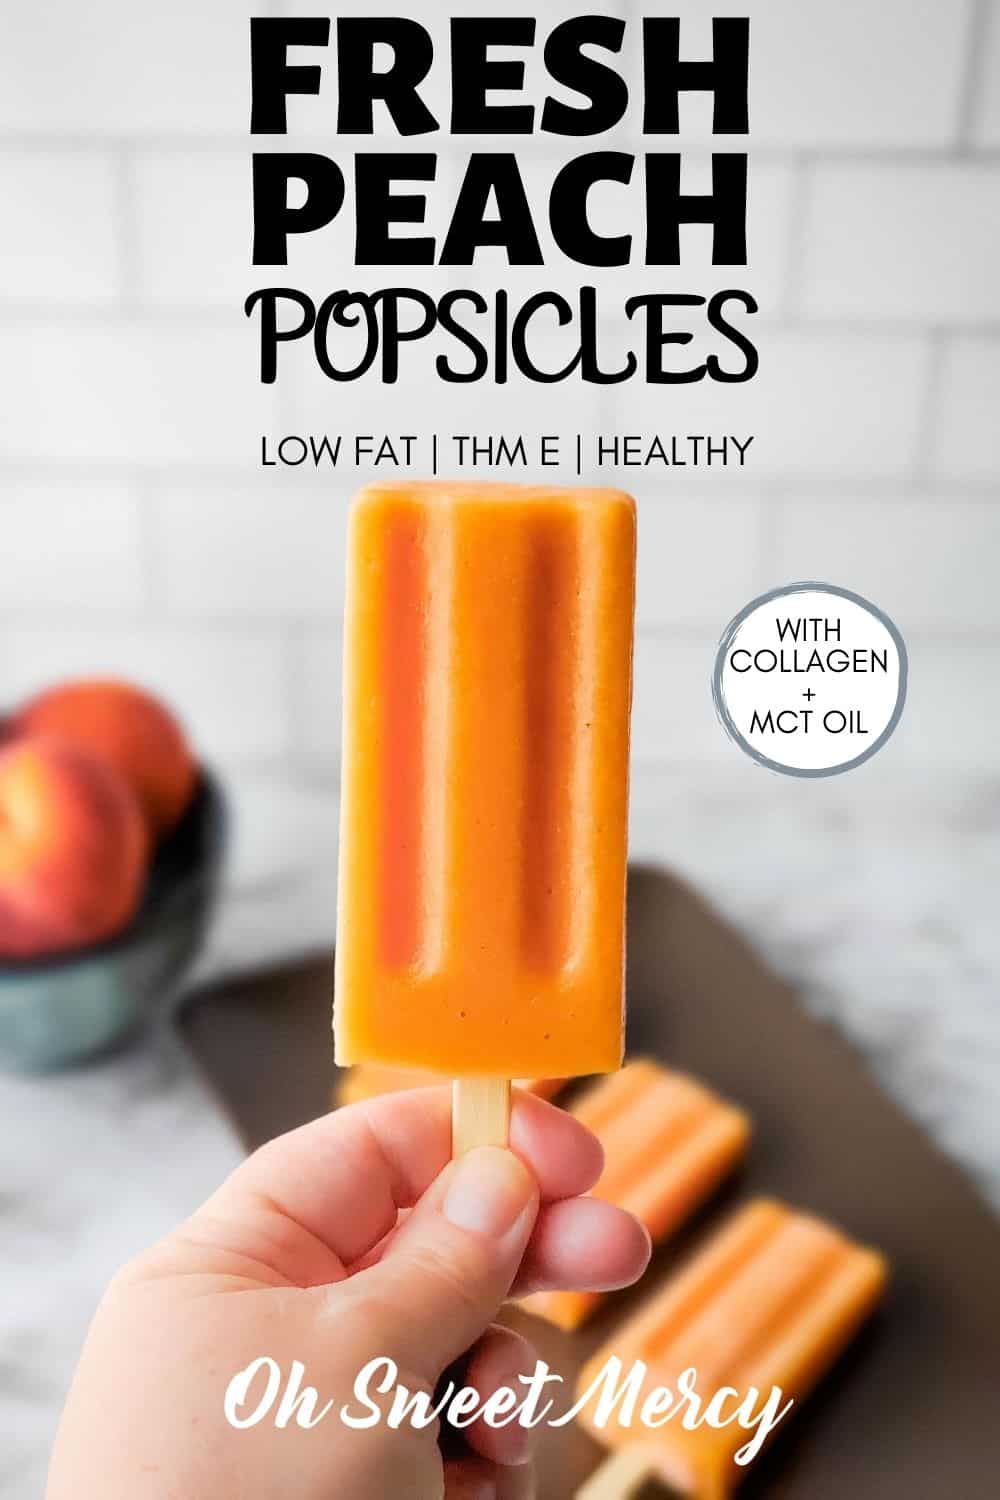 Fresh Peach Popsicles boosted with collagen and MCT oil are a perfect THM E treat for hot summer days! #lowfat #thm #peaches #popsicles #healthy #summertreats #homemadepopsicles @ohsweetmercy